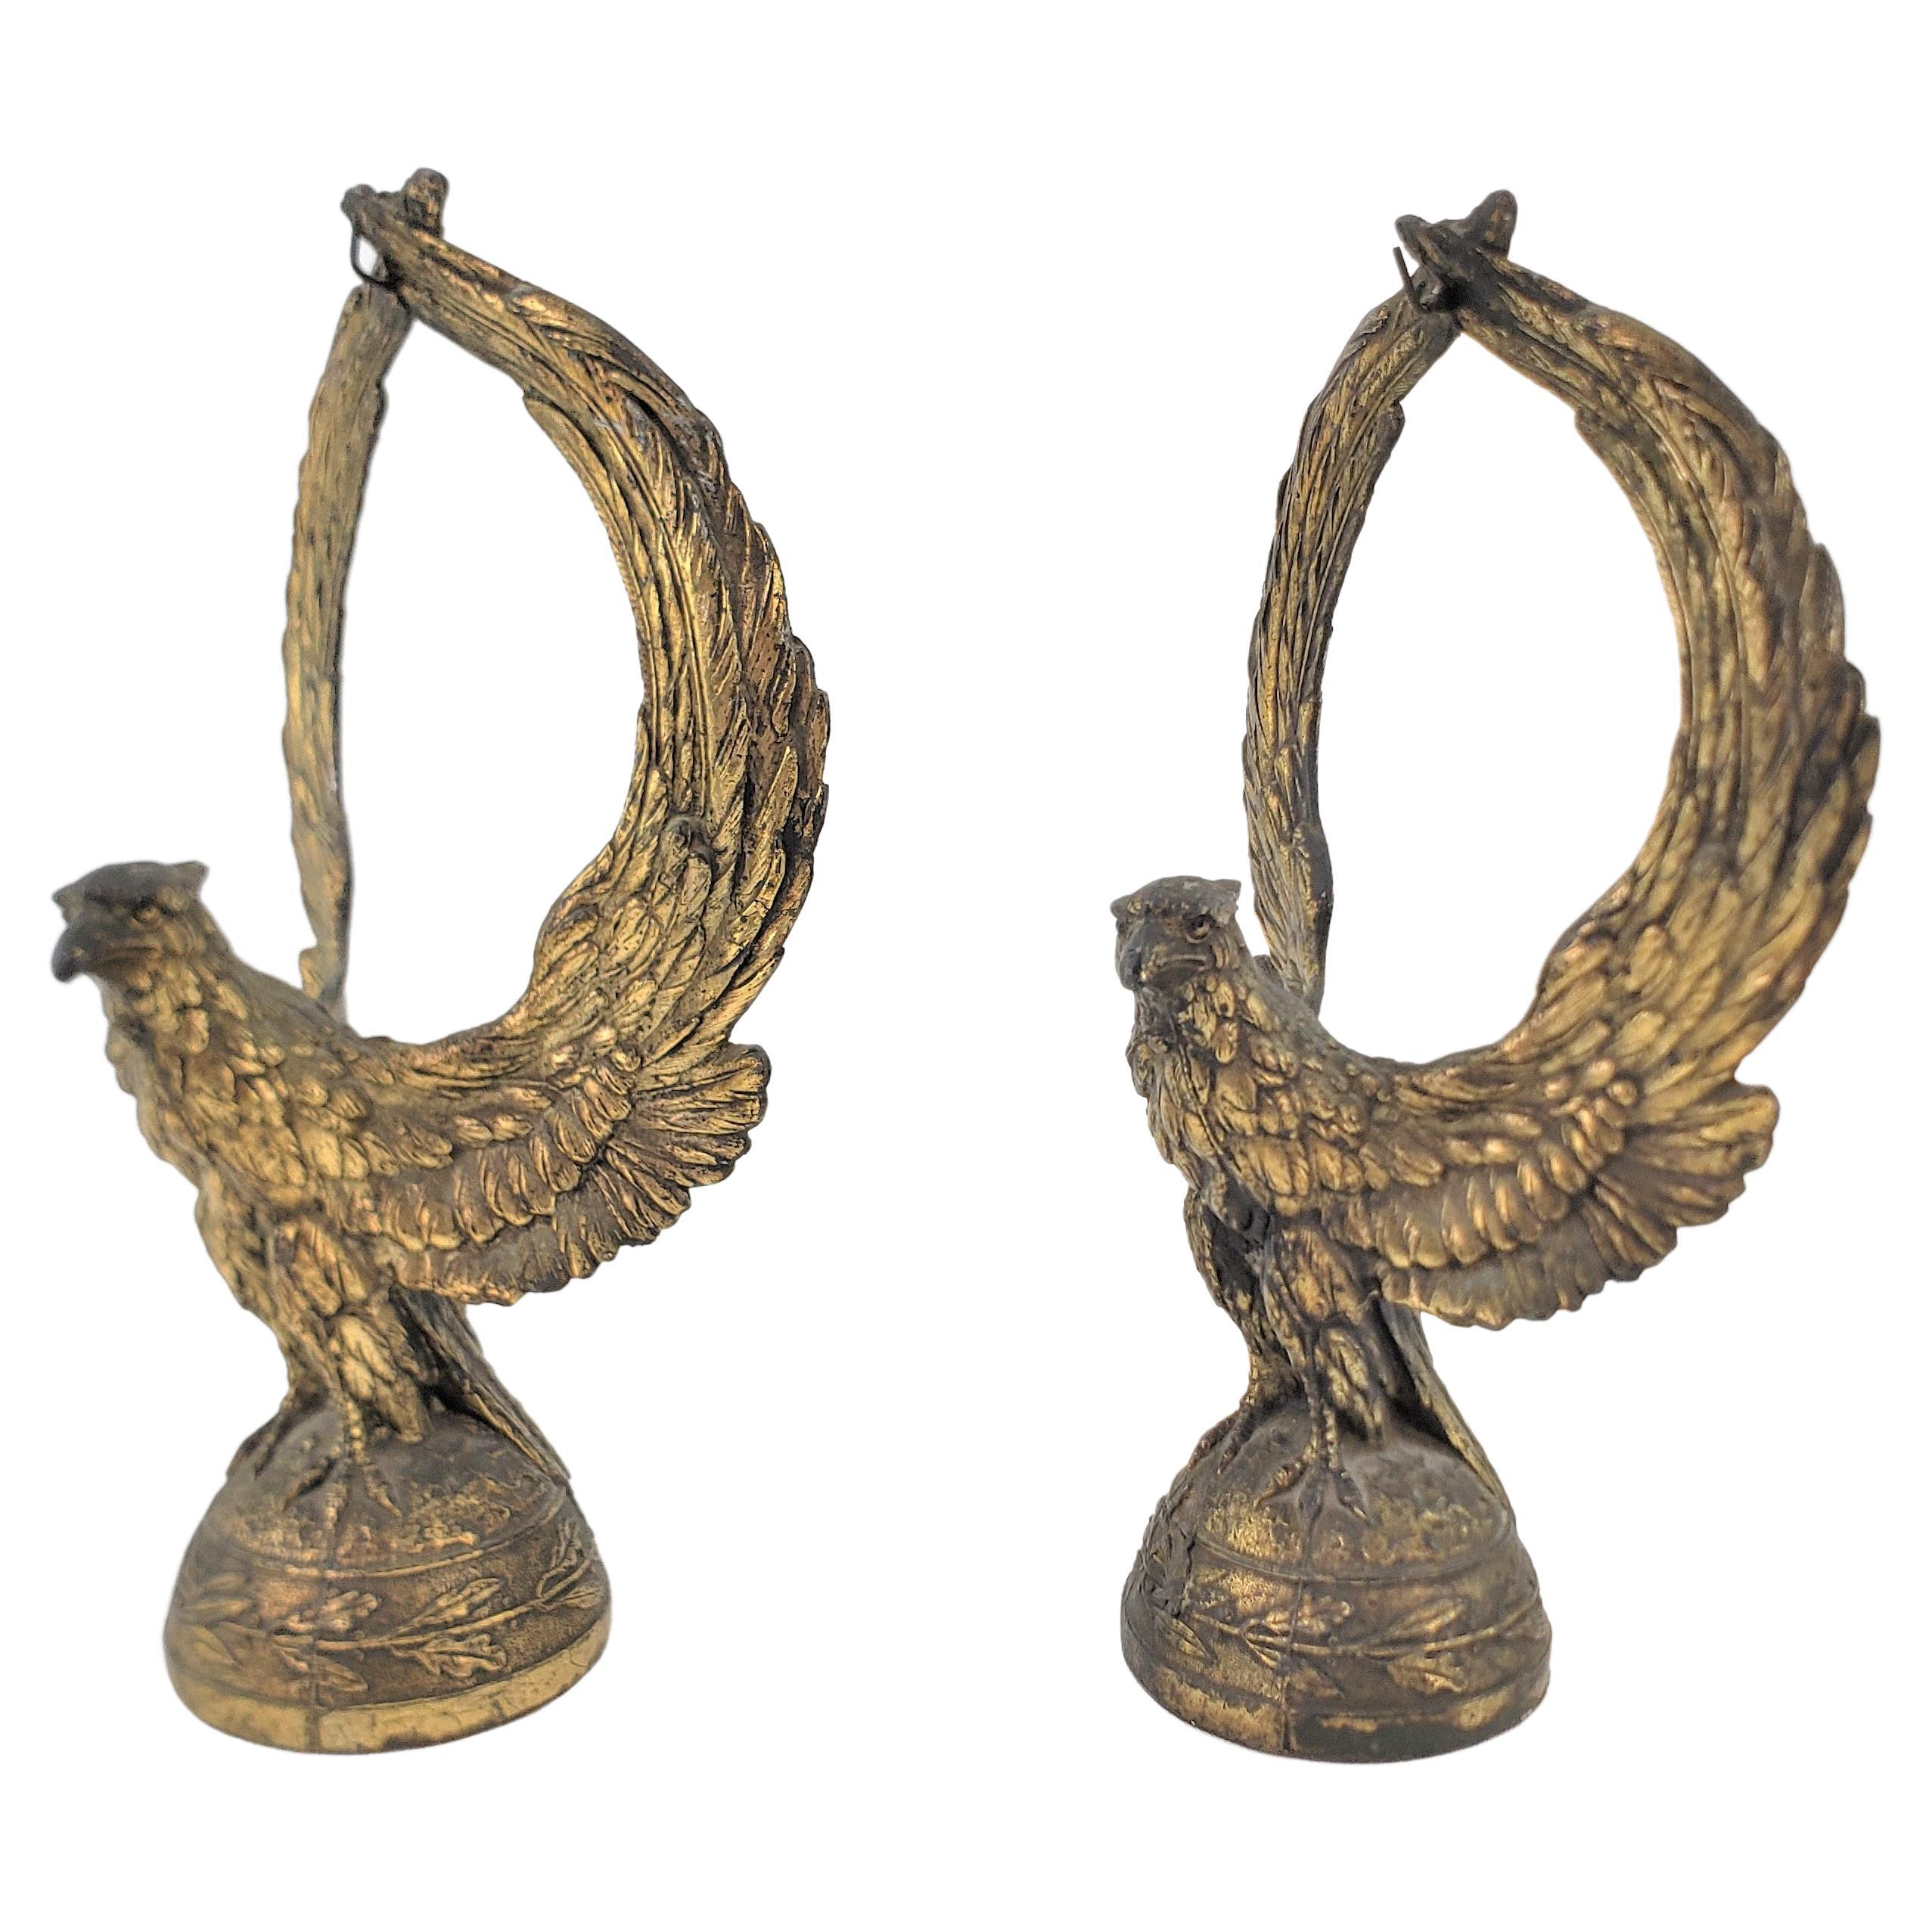 Pair of Antique Brass Plated Figural Bald Eagle Pocket Watch Stands or Bookends